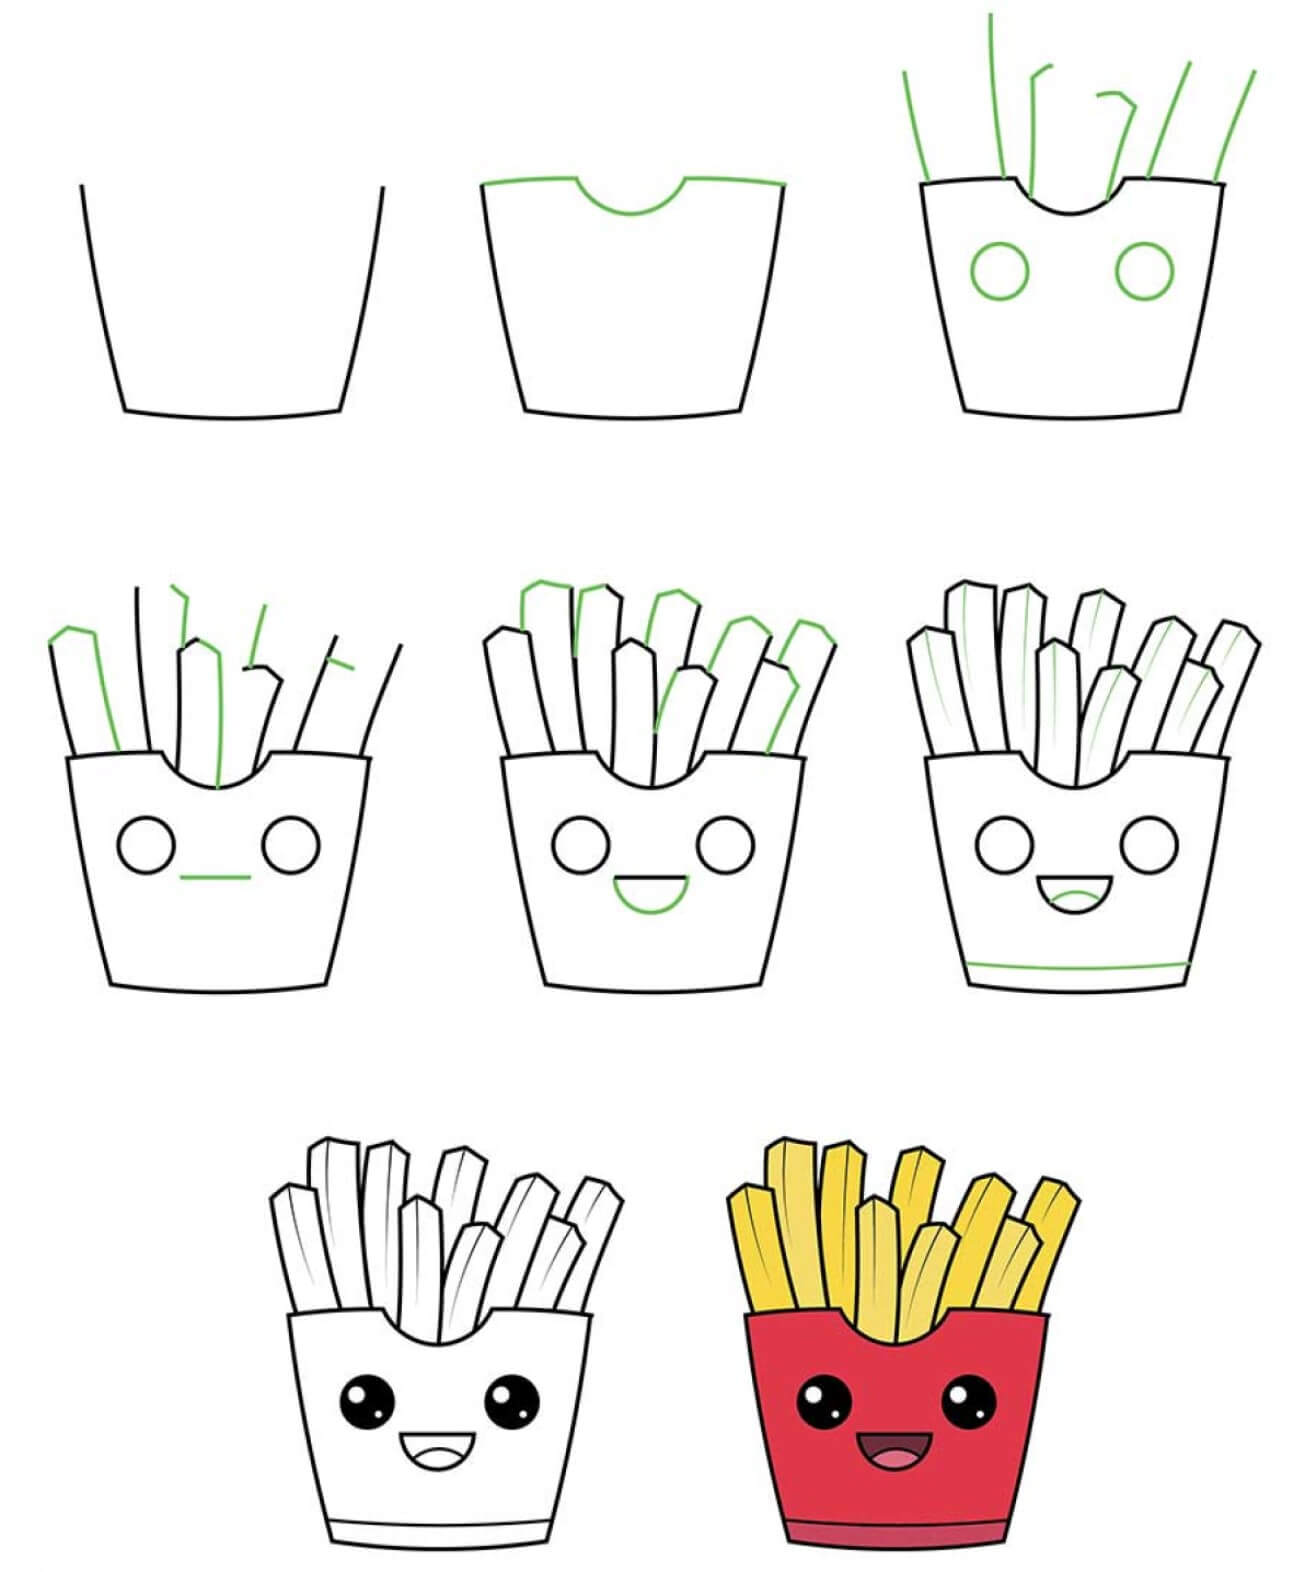 French fries cartoon Drawing Ideas